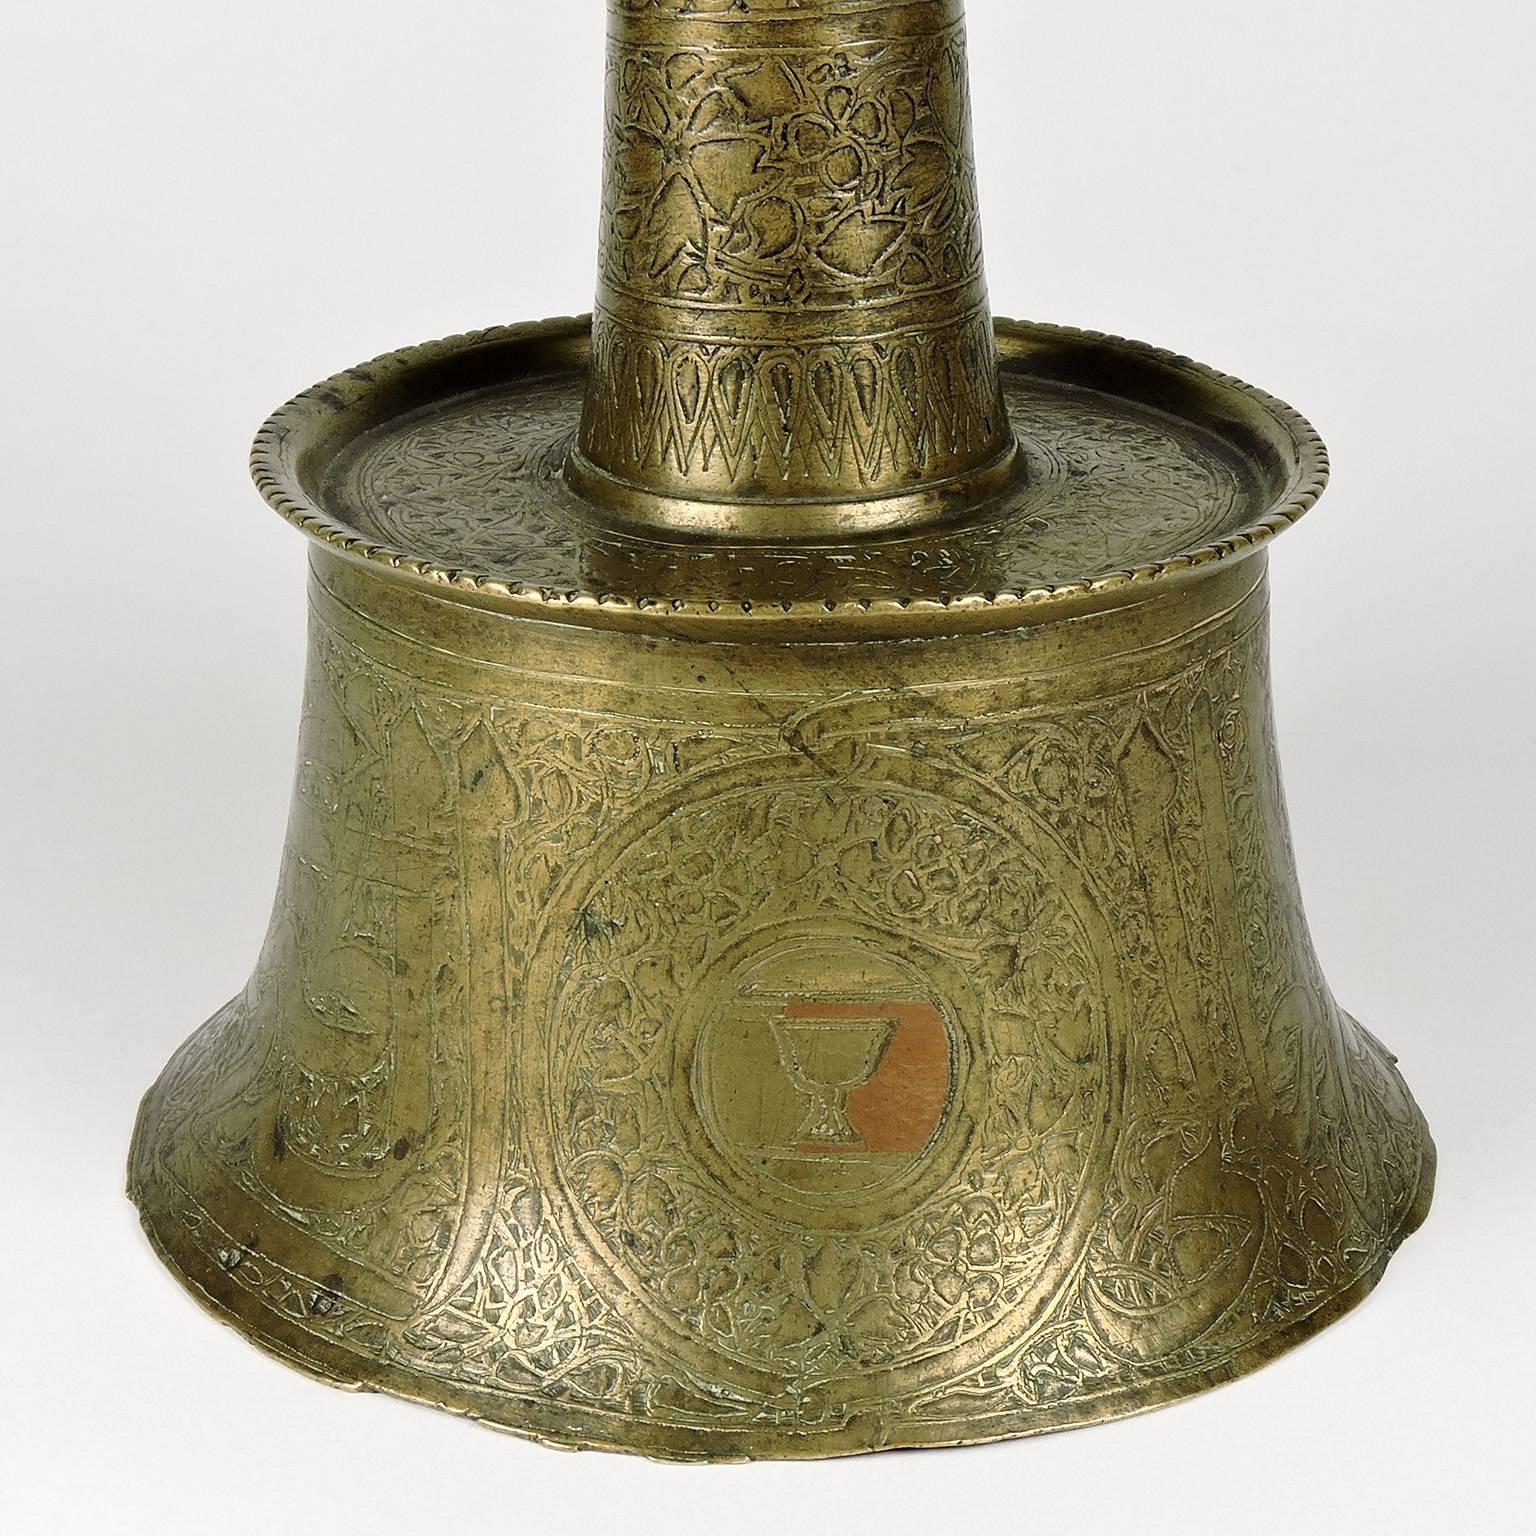 Egyptian Mamluk calligraphic brass candlestick, 14th century. The base of waisted form leading to slightly reduced foot, cylindrical neck tapering to inverted mouth surmounting a short drip pan. Base with a large band of thuluth calligraphy against